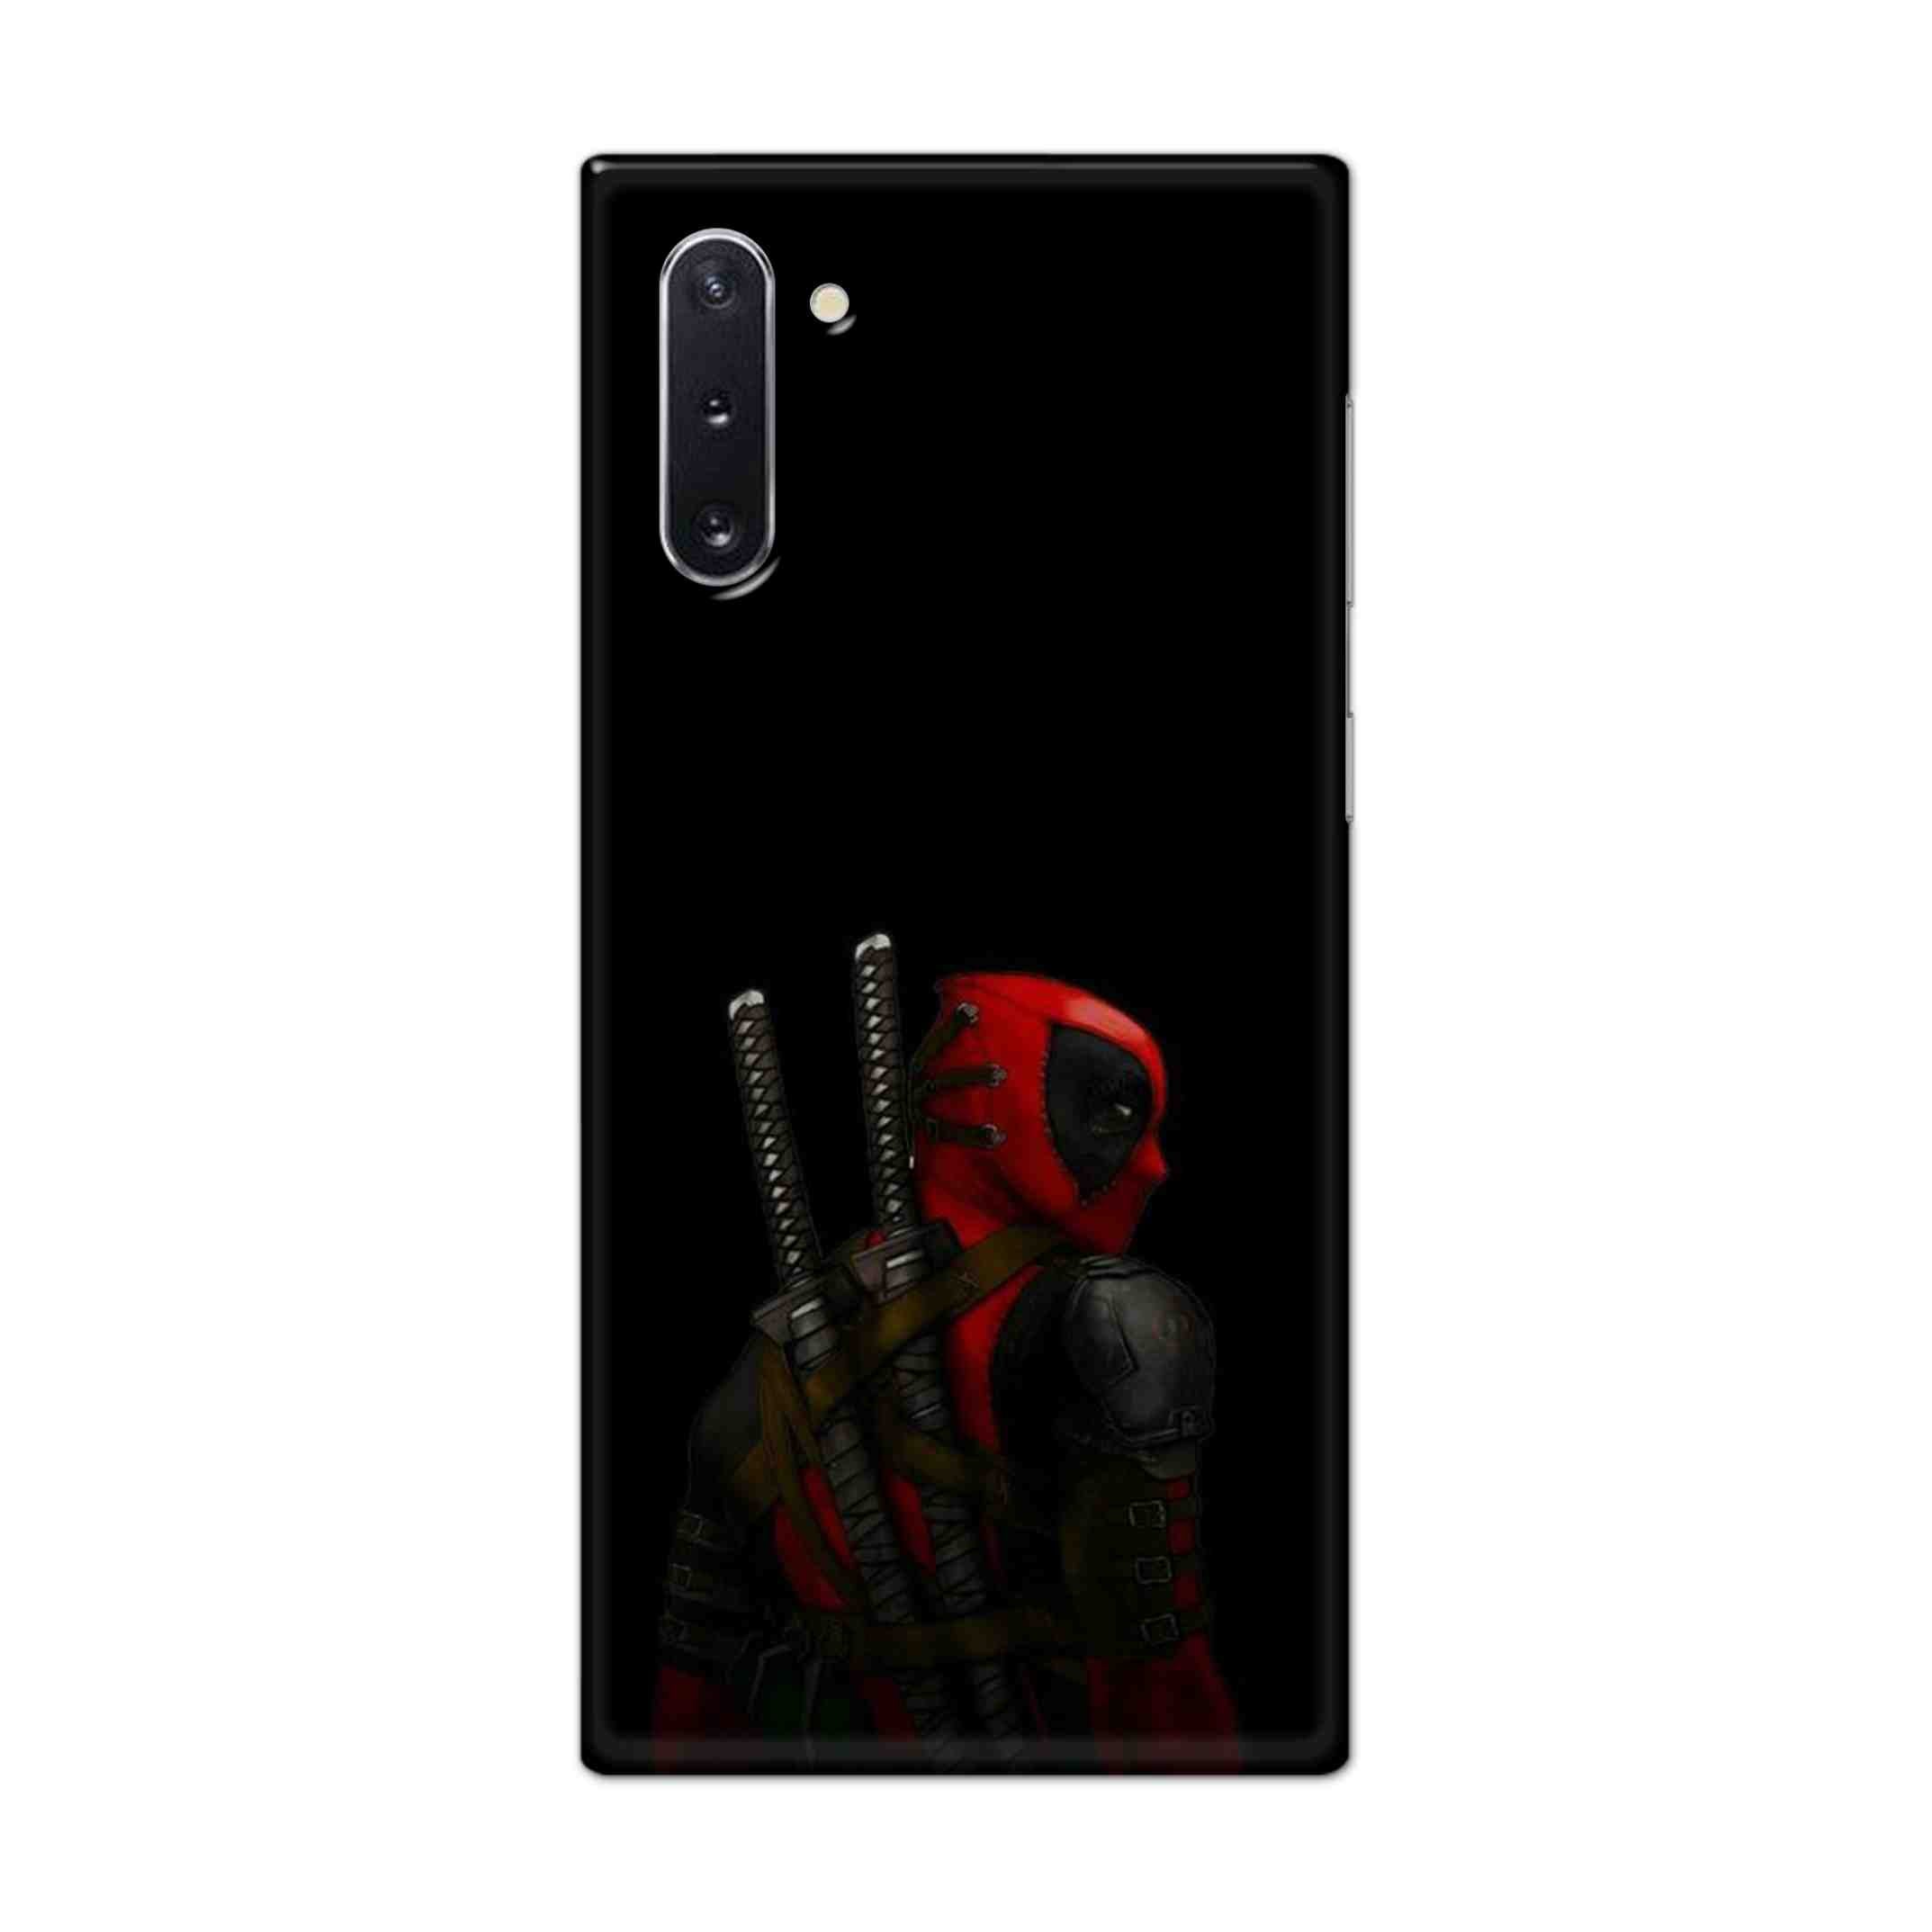 Buy Deadpool Hard Back Mobile Phone Case Cover For Samsung Galaxy Note 10 Online